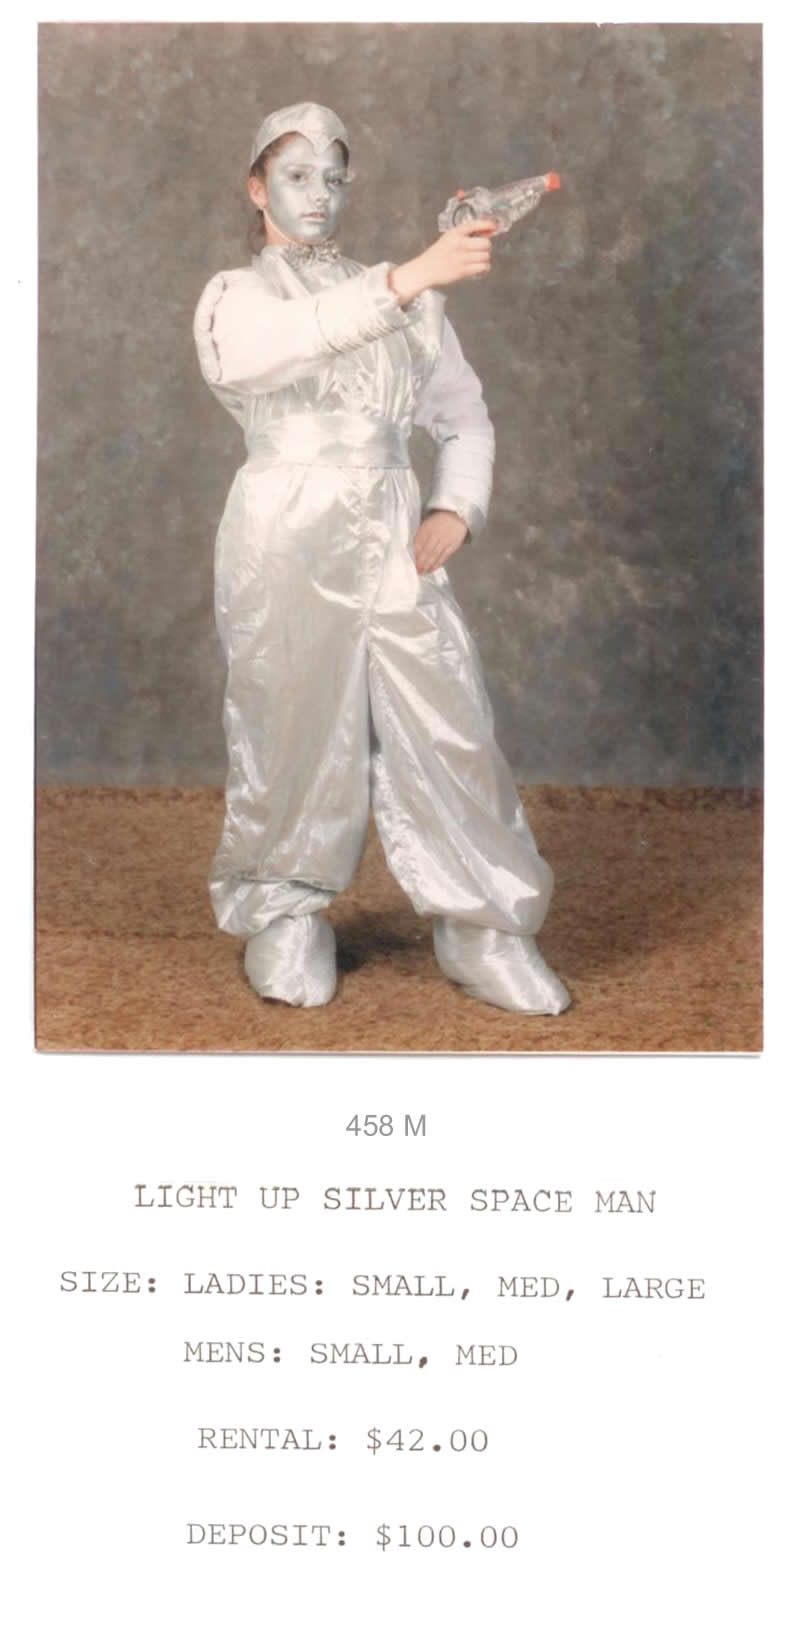 LIGHT UP SILVER SPACE MAN